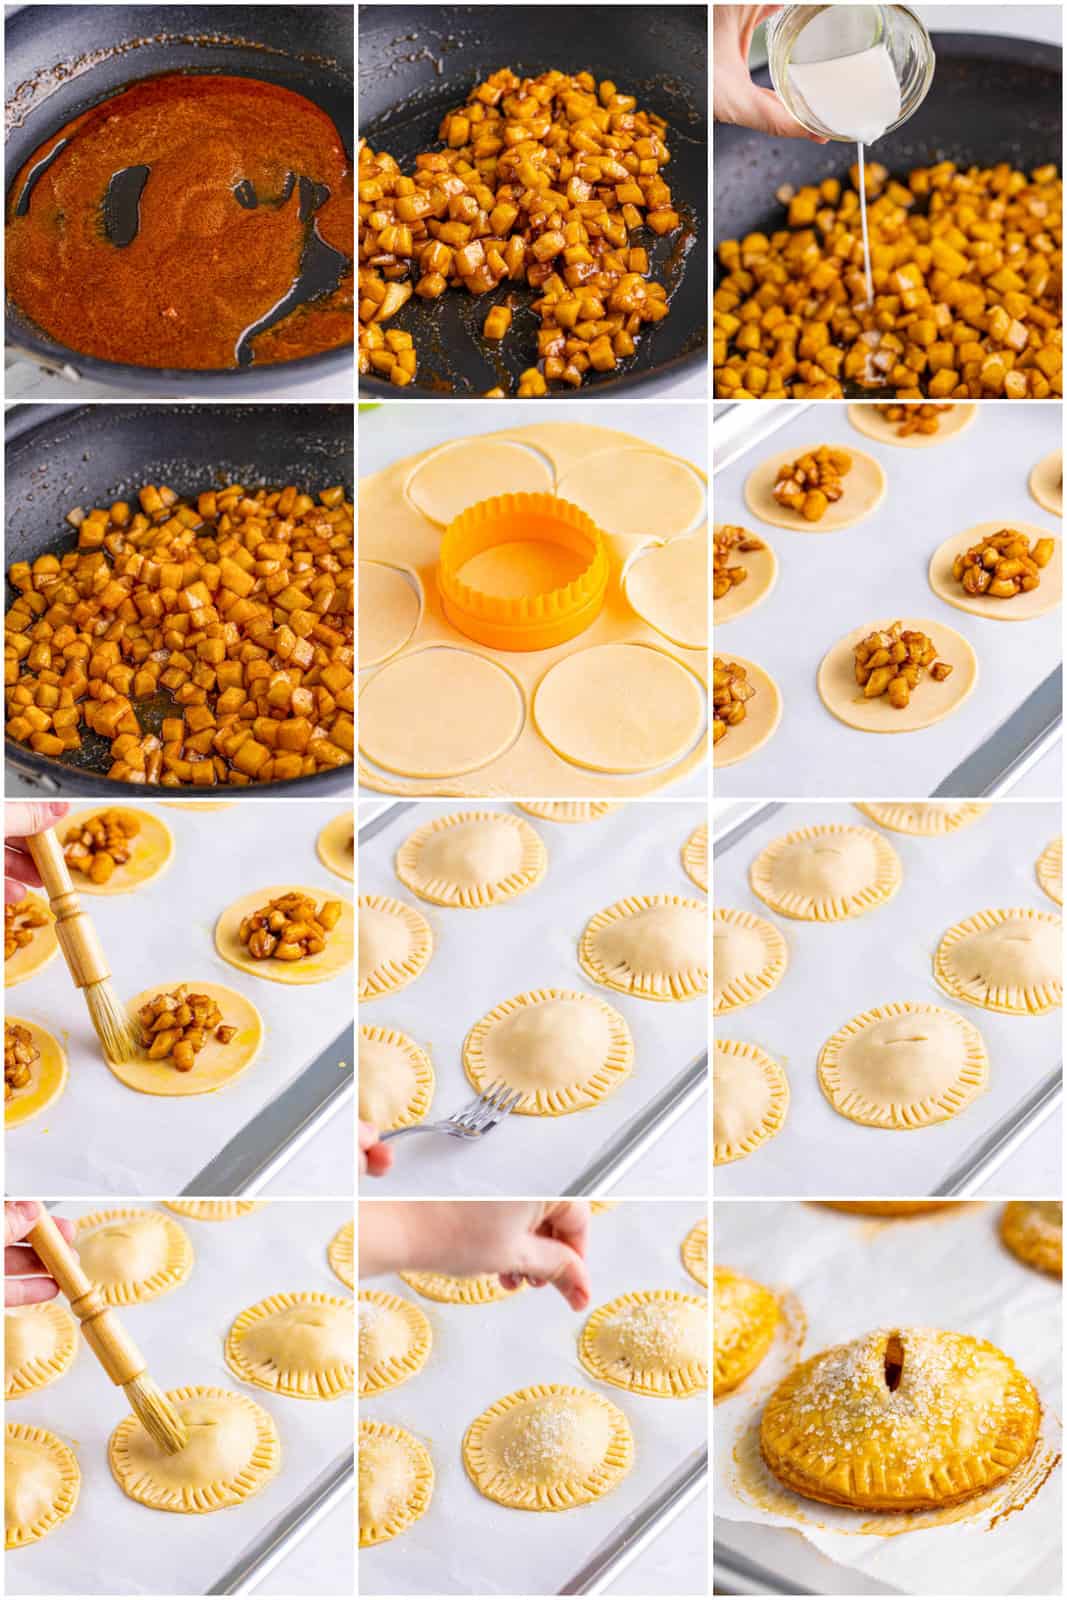 Step by step photos on how to make Apple Hand Pies.